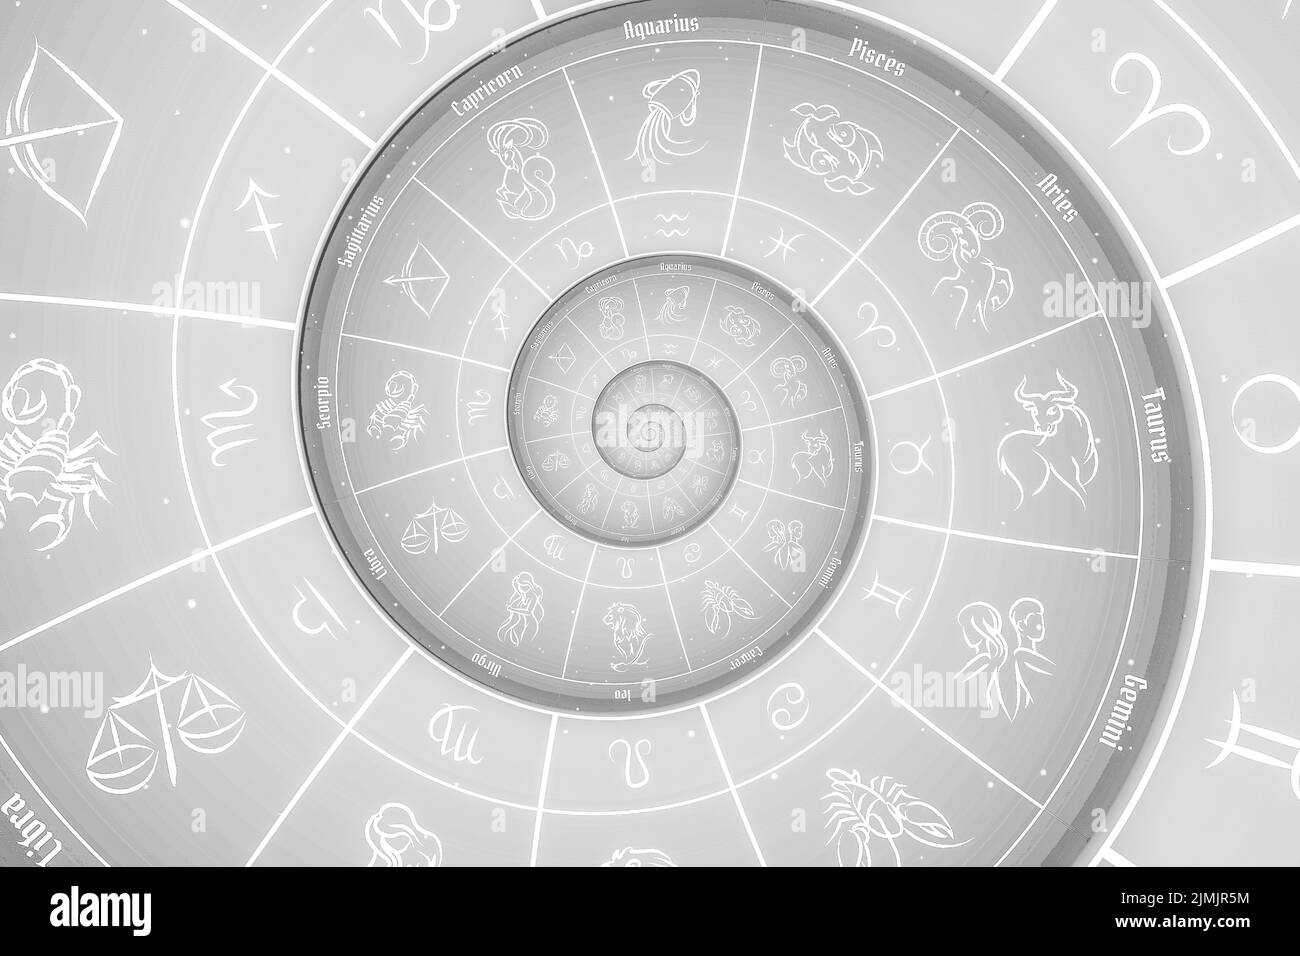 Astrological background with zodiac signs and symbol. Stock Photo